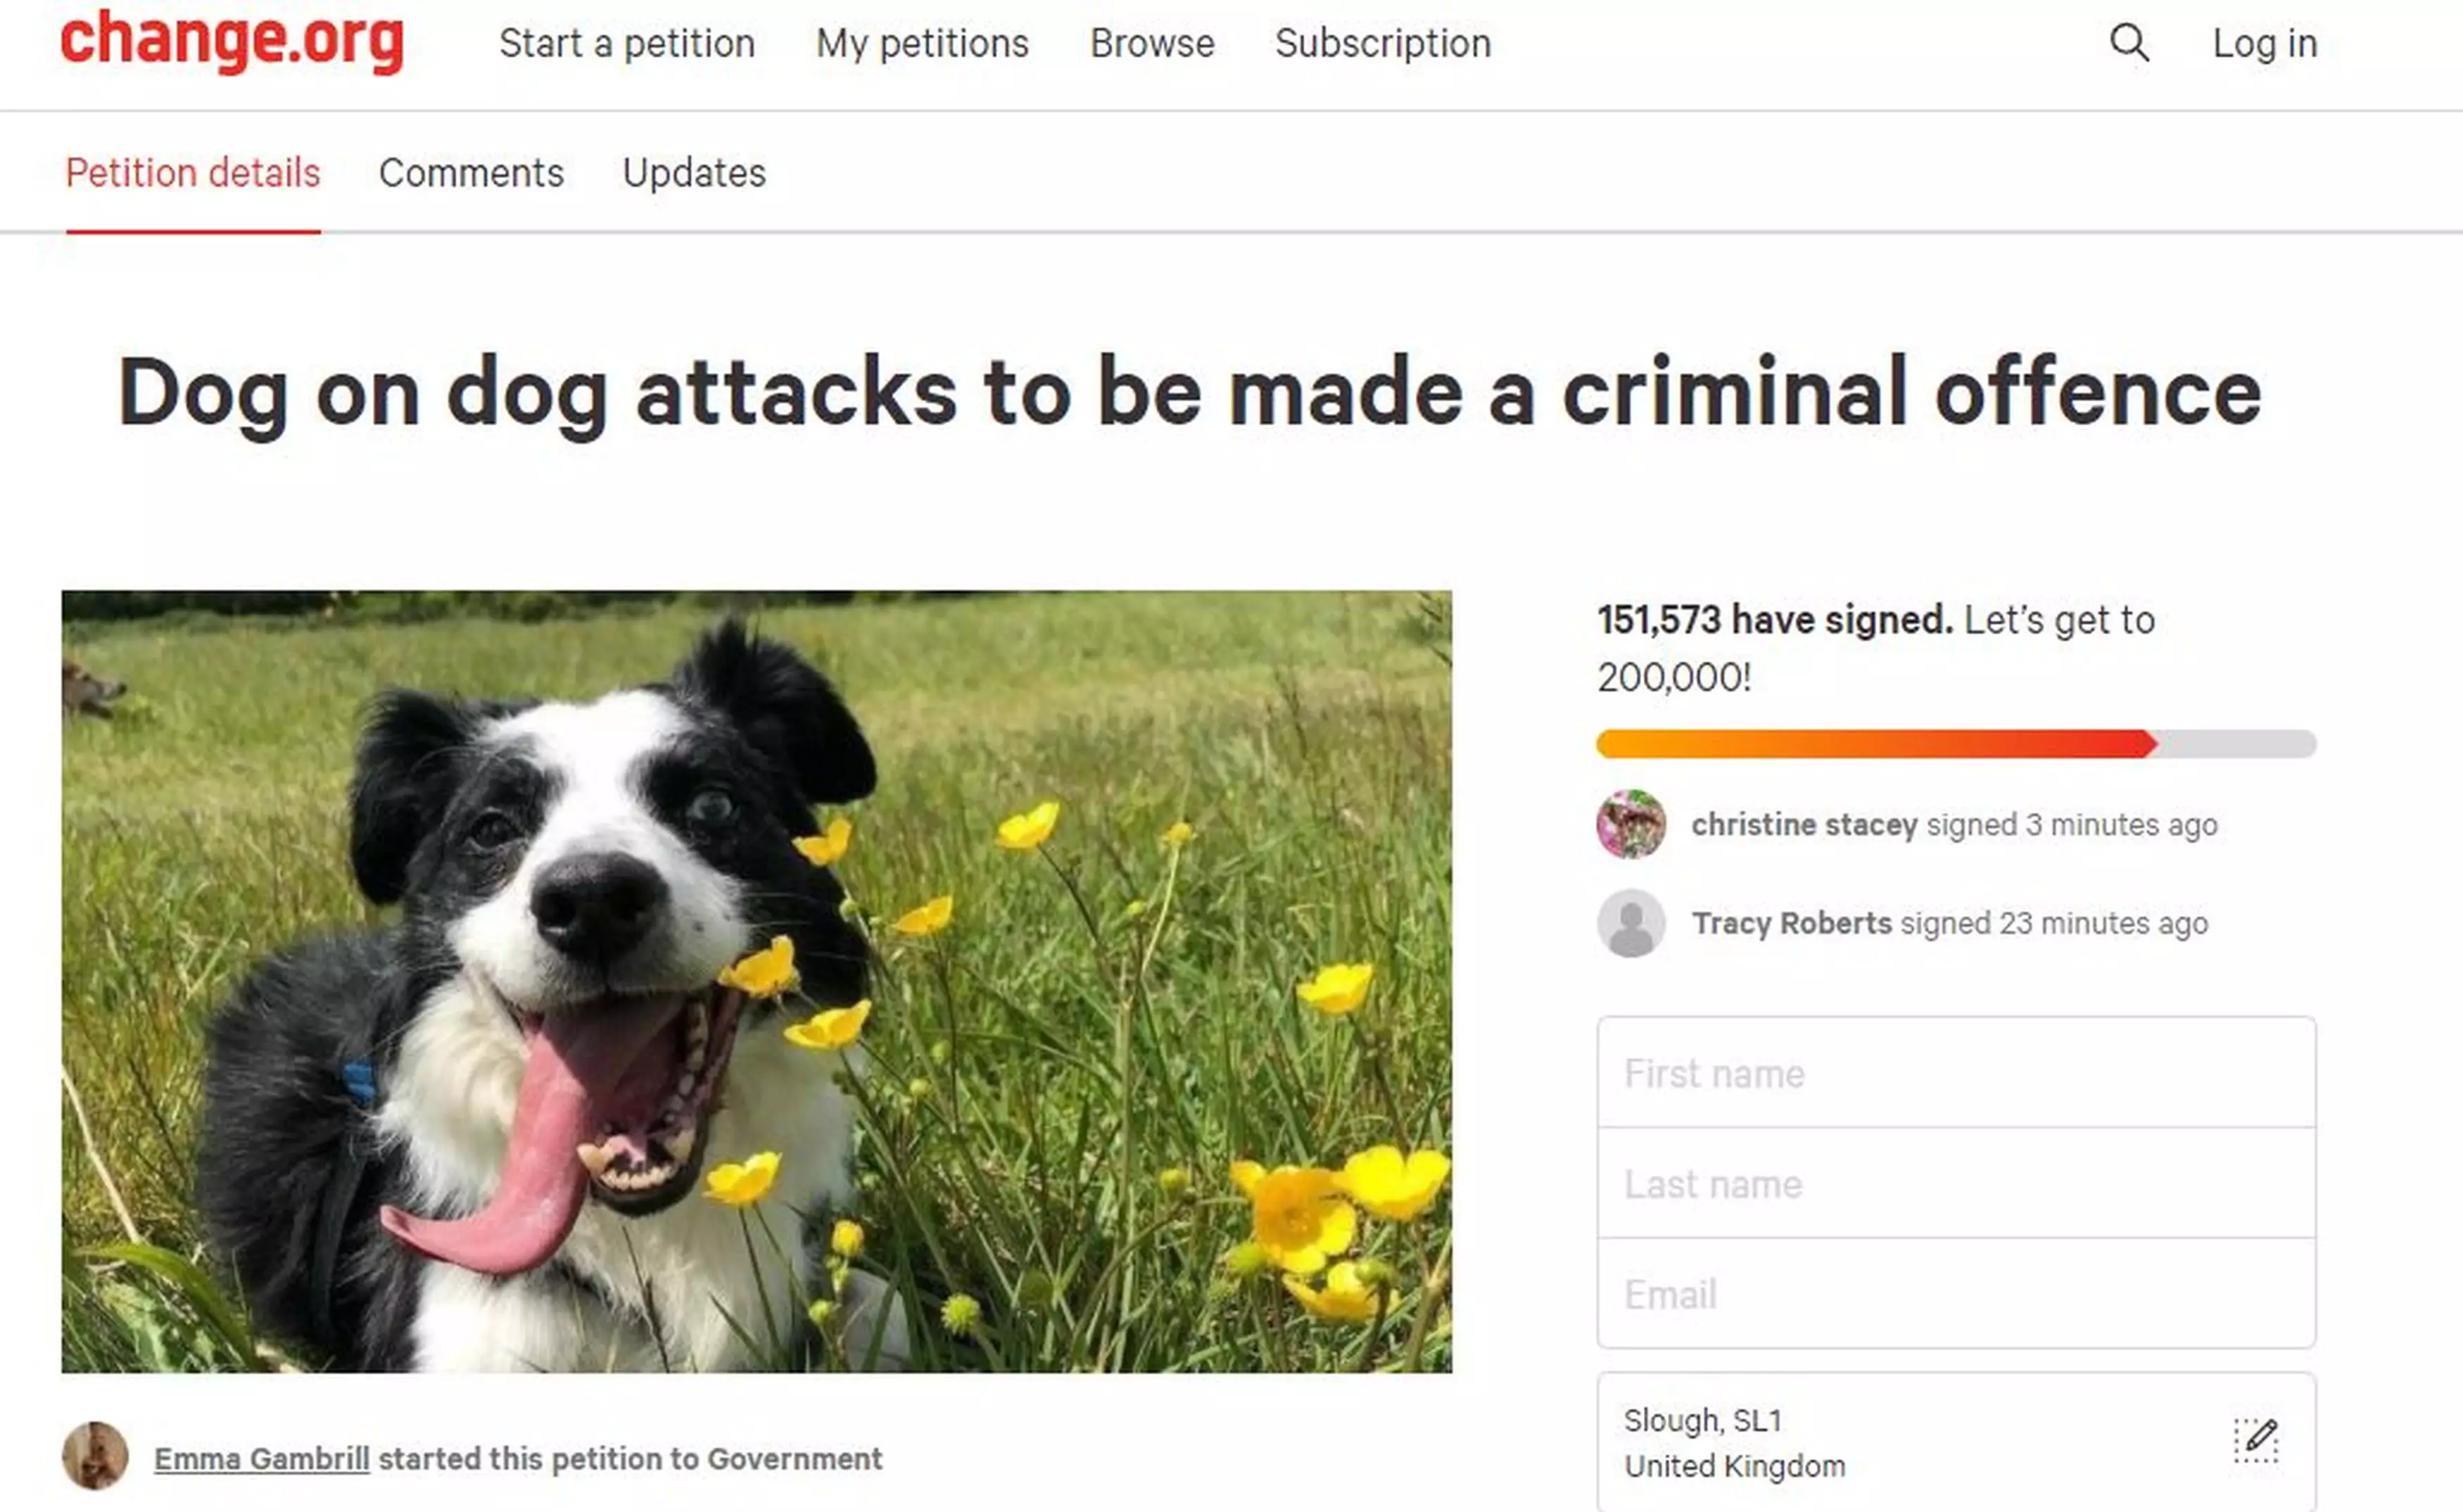 Emma launched a petition after her dog was killed (